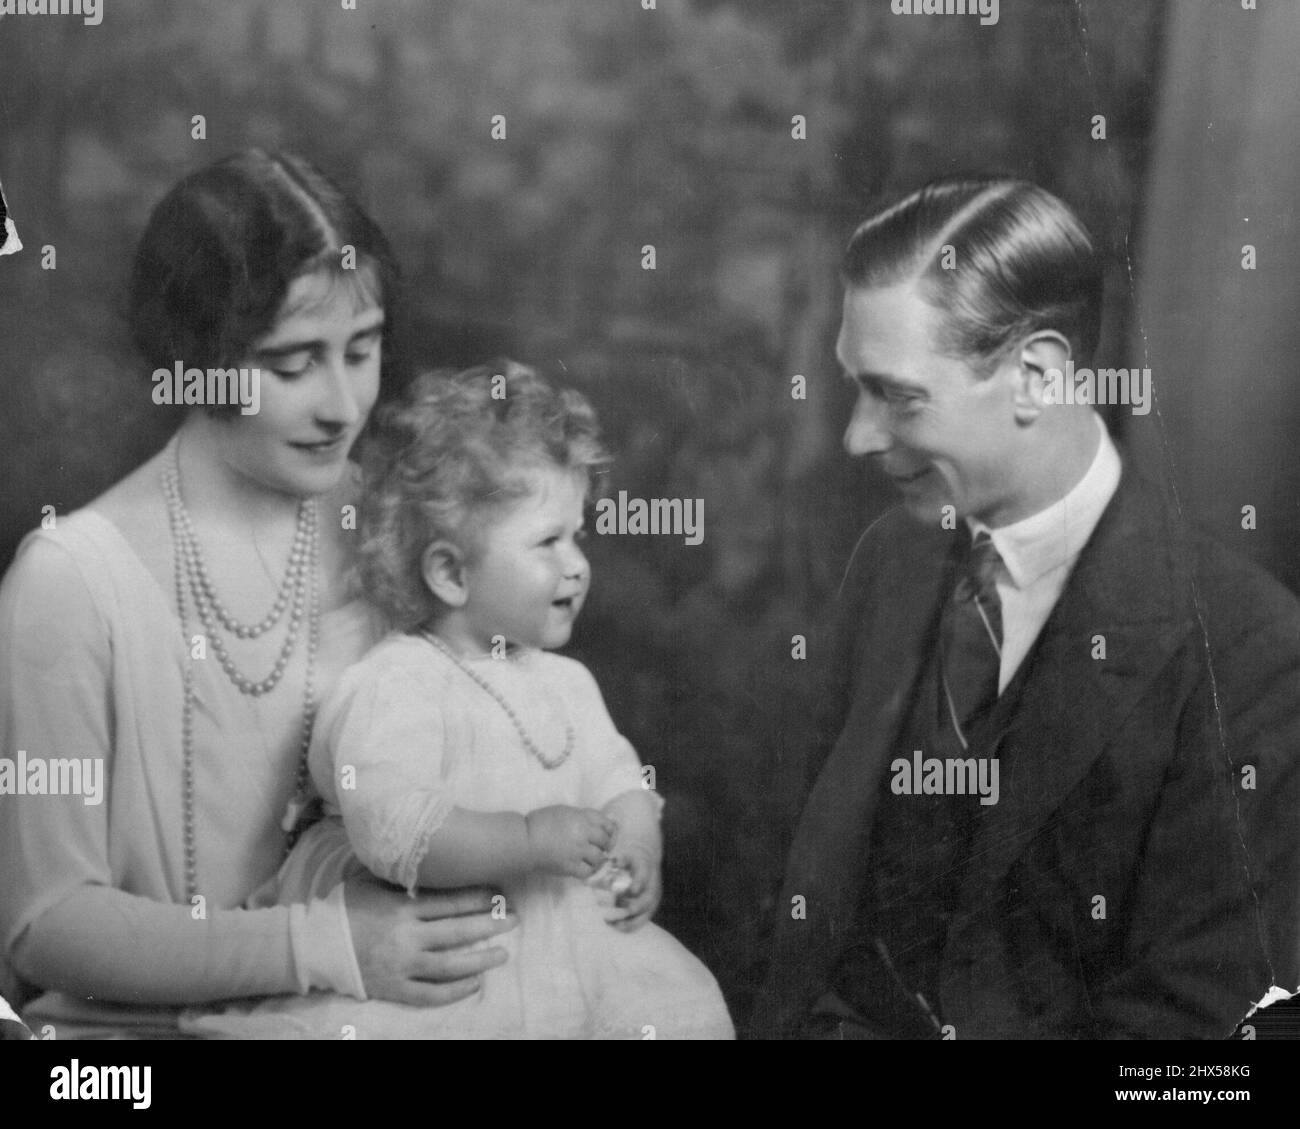 New portrait King & Queen and Princess Elizabeth. January 14, 1937. (Photo by Marcus Adams, The Herald). Stock Photo